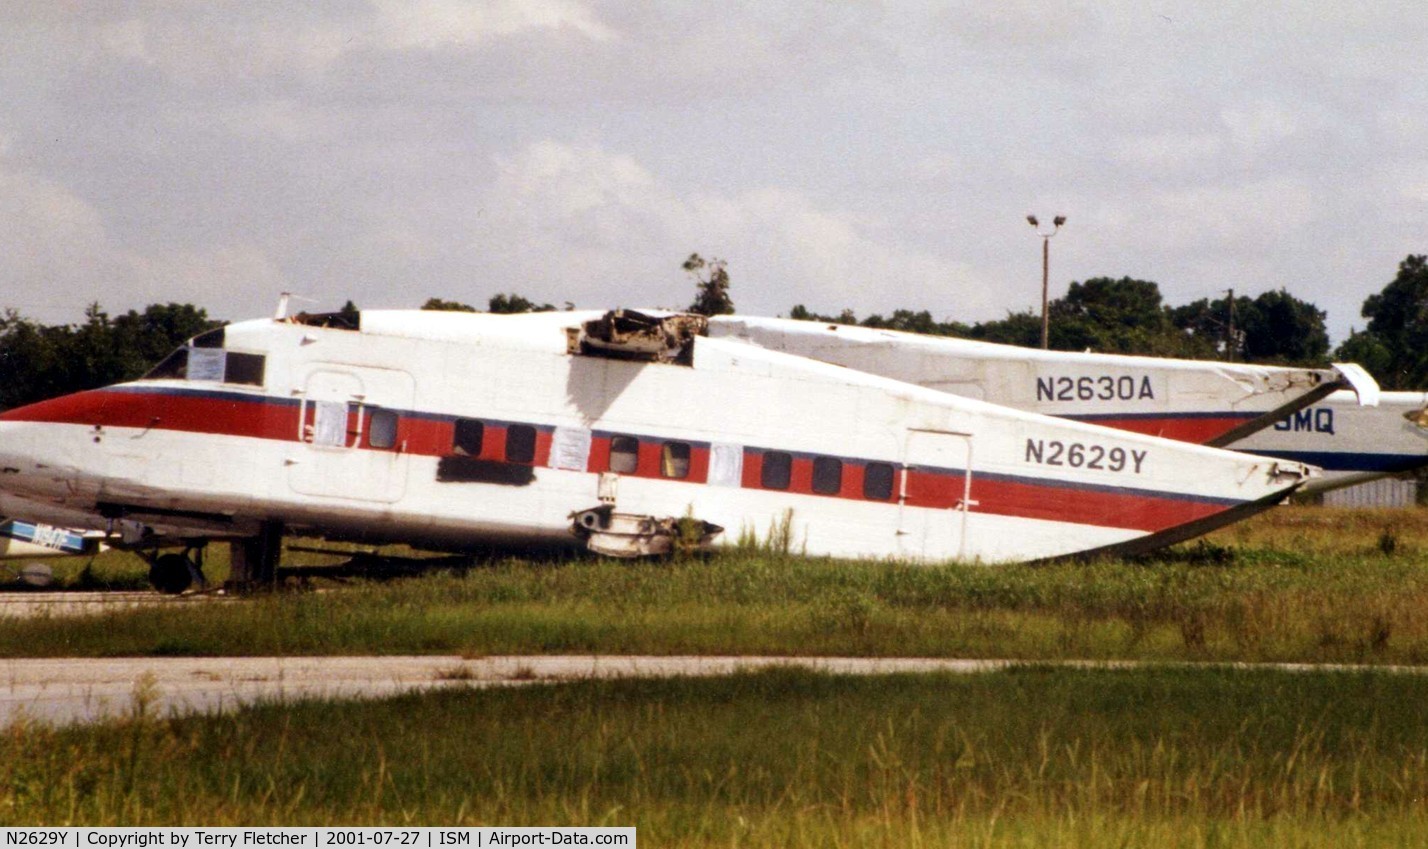 N2629Y, 1981 Short SD3-30 C/N SH3080, This SD3-30 was WFU at Kissimmee